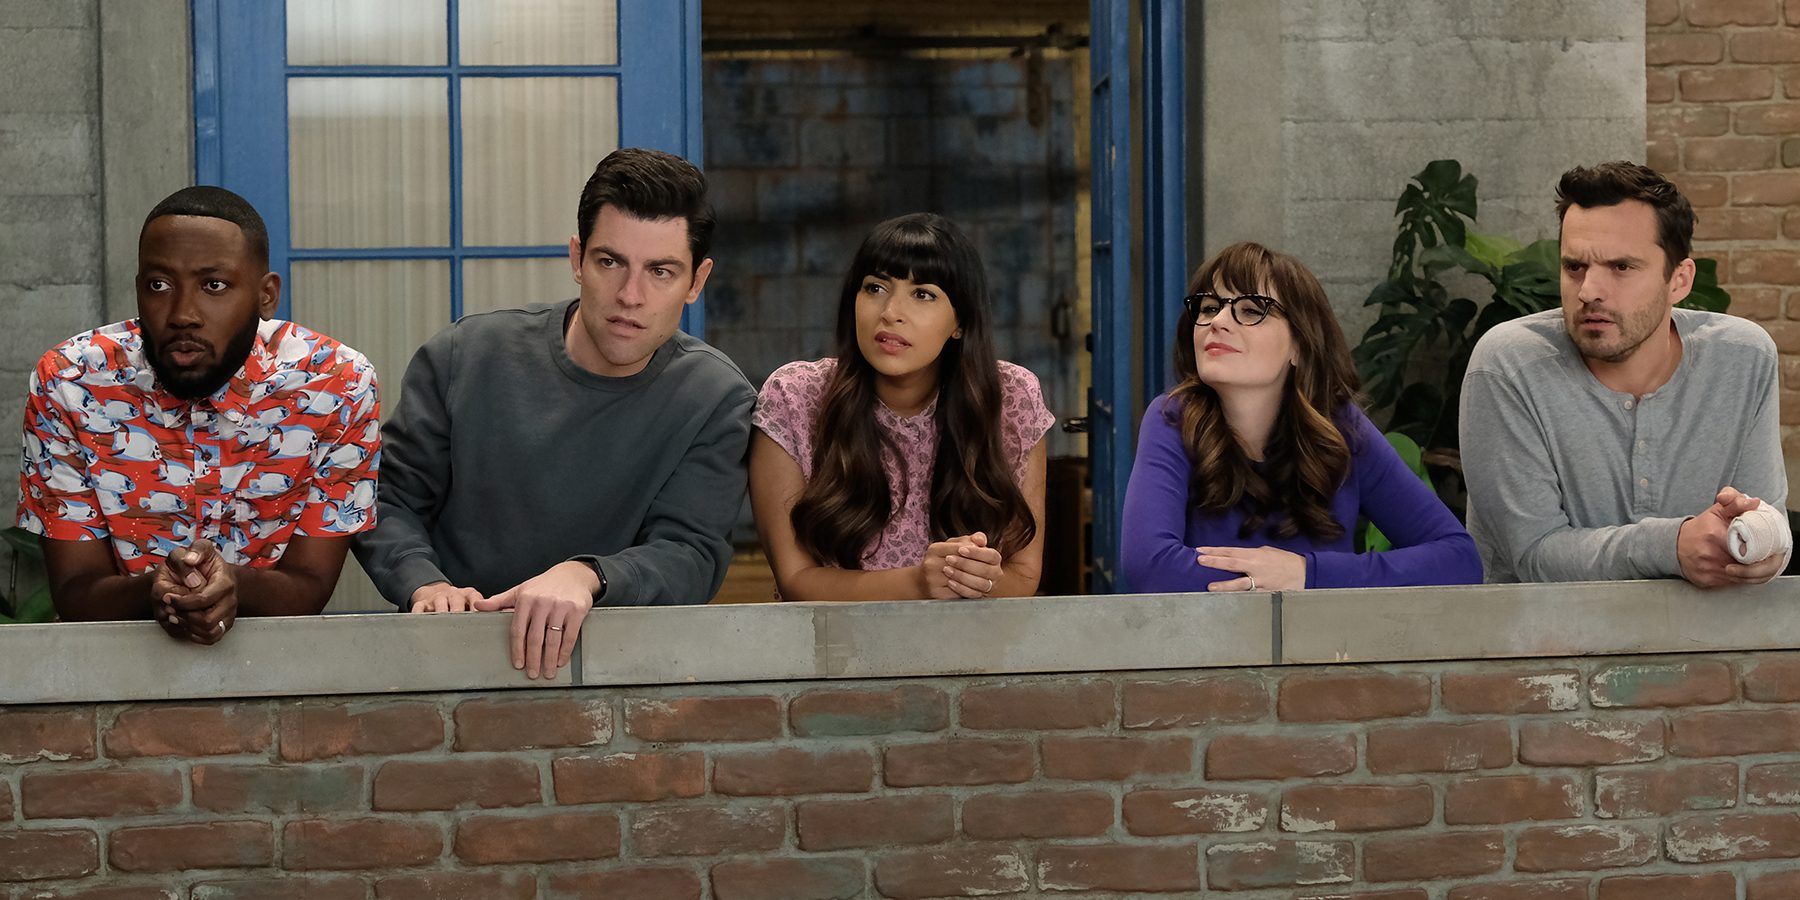 Winston, Schmidt, Cece, Jess, and Nick on the loft balcony in the final New Girl episode